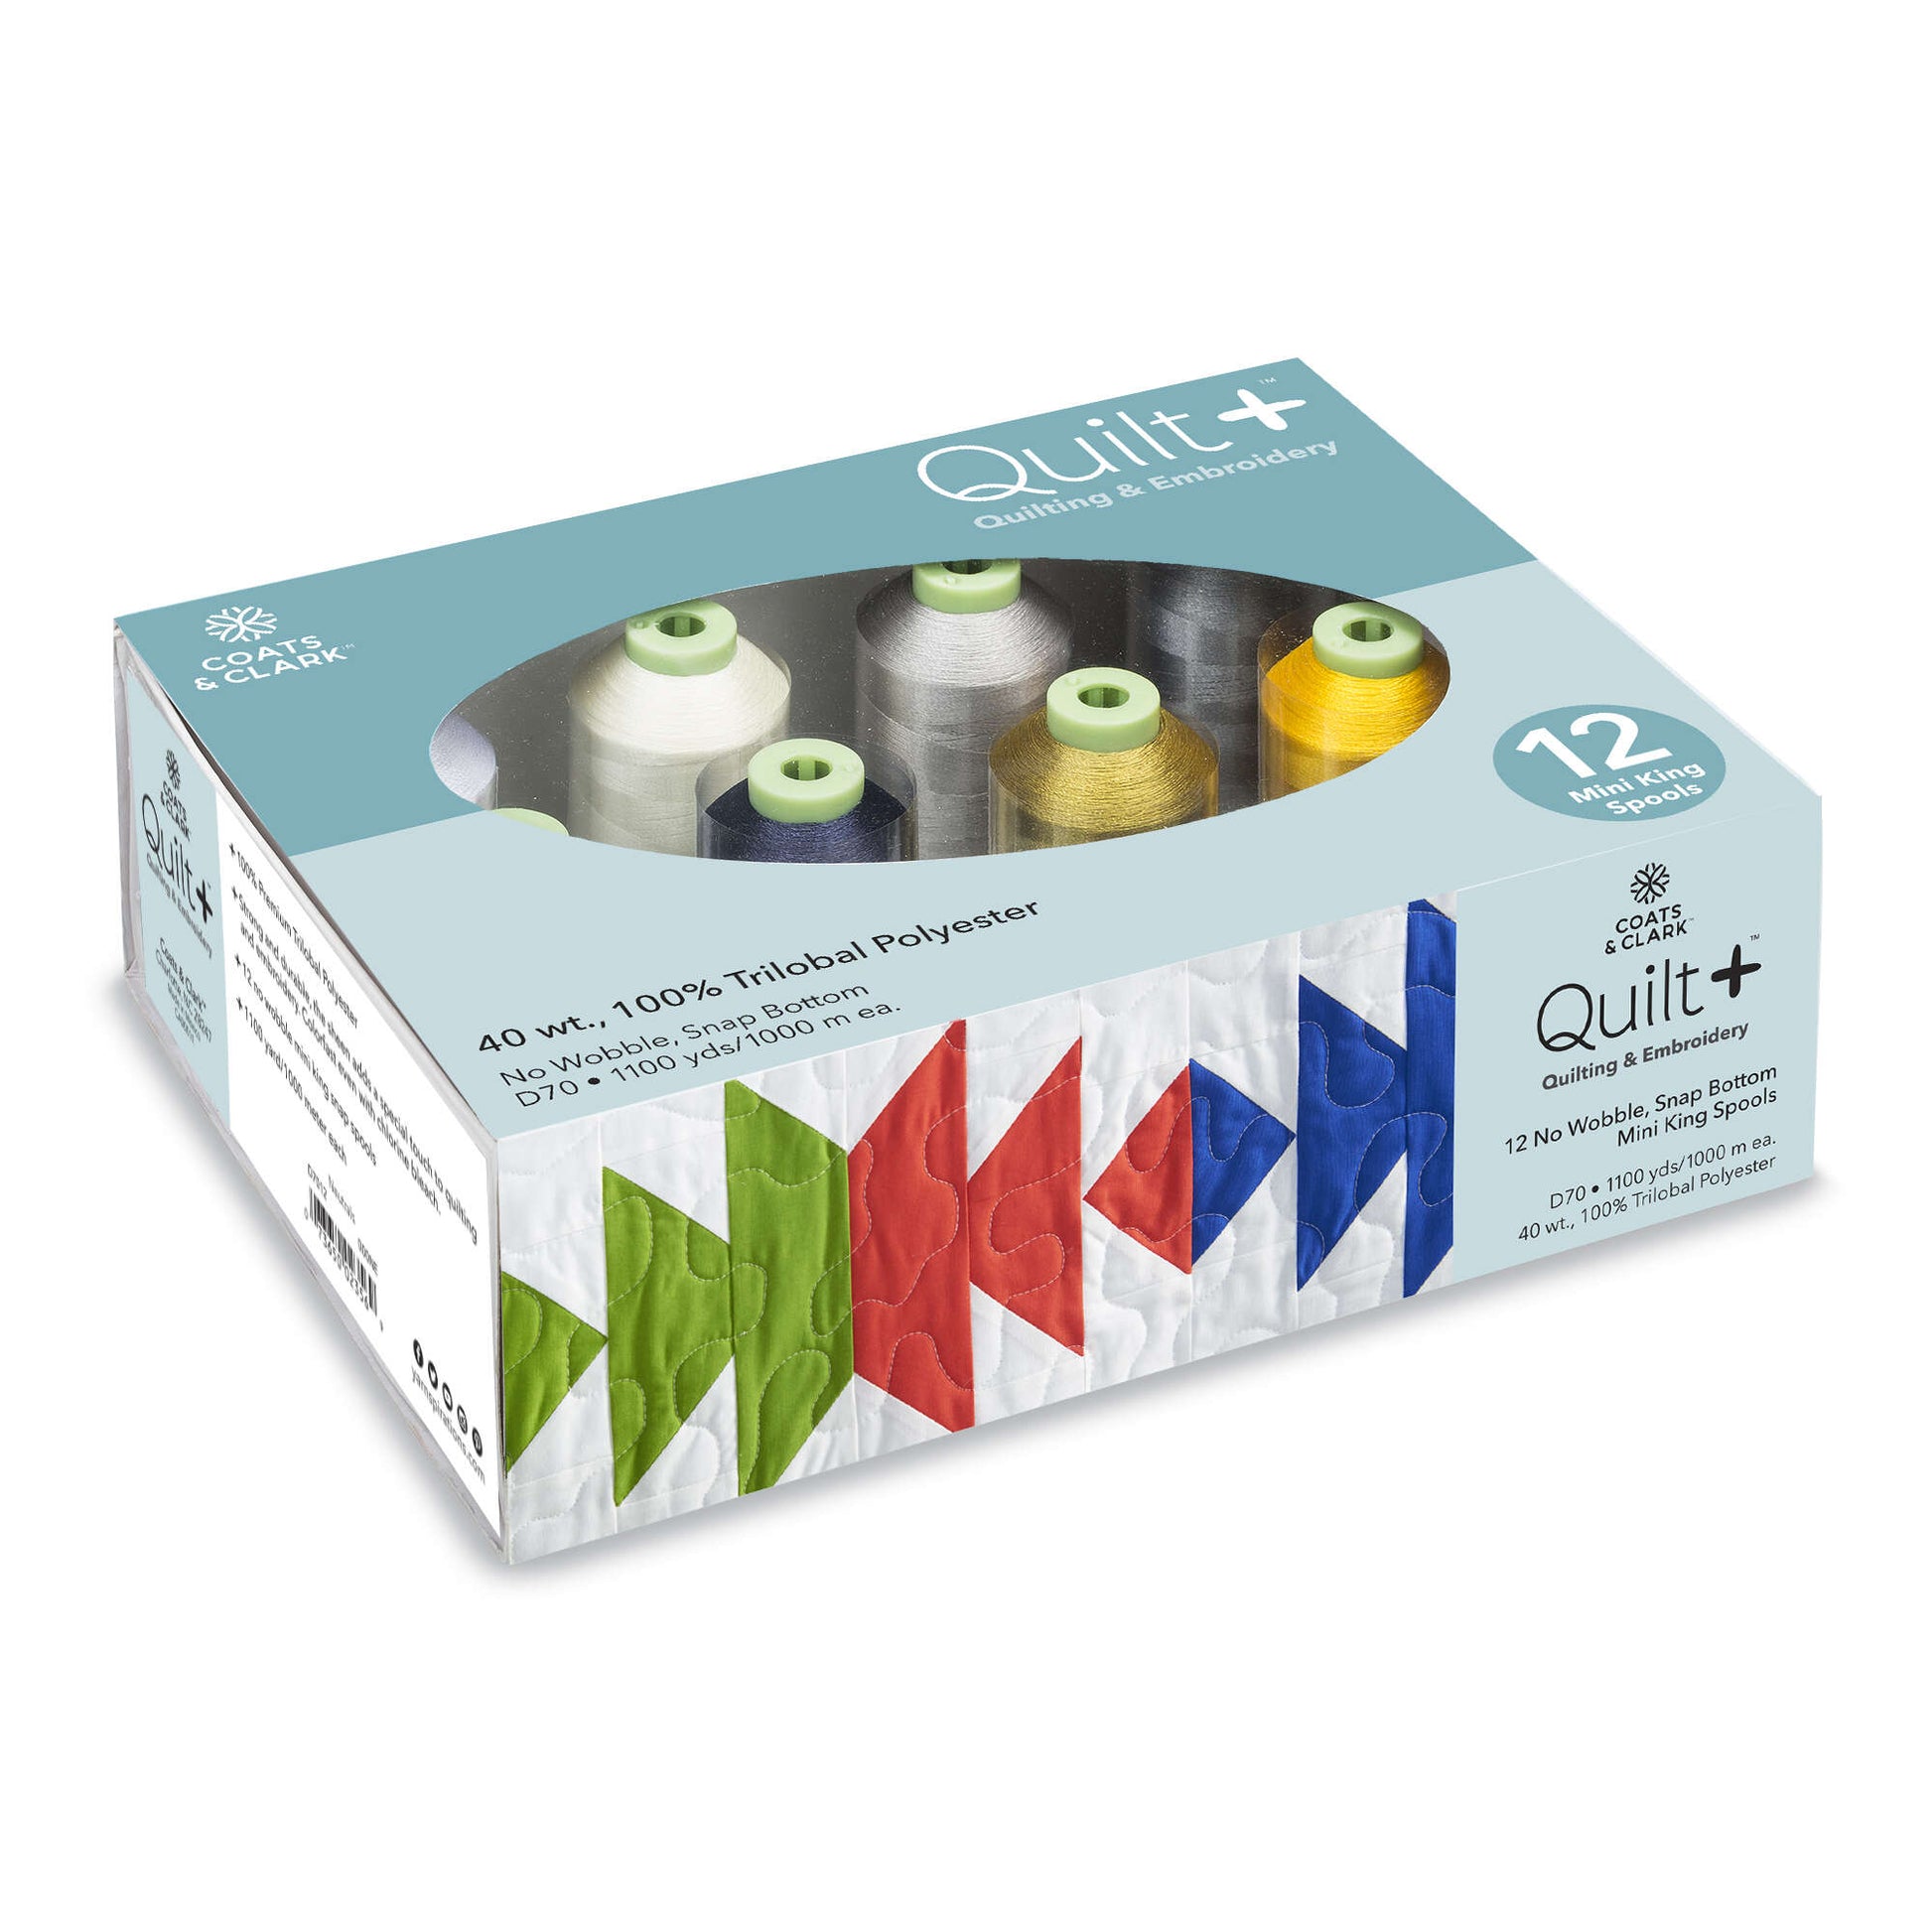 Coats & Clark Quilt + Quilting & Embroidery Thread 12 Spool Set